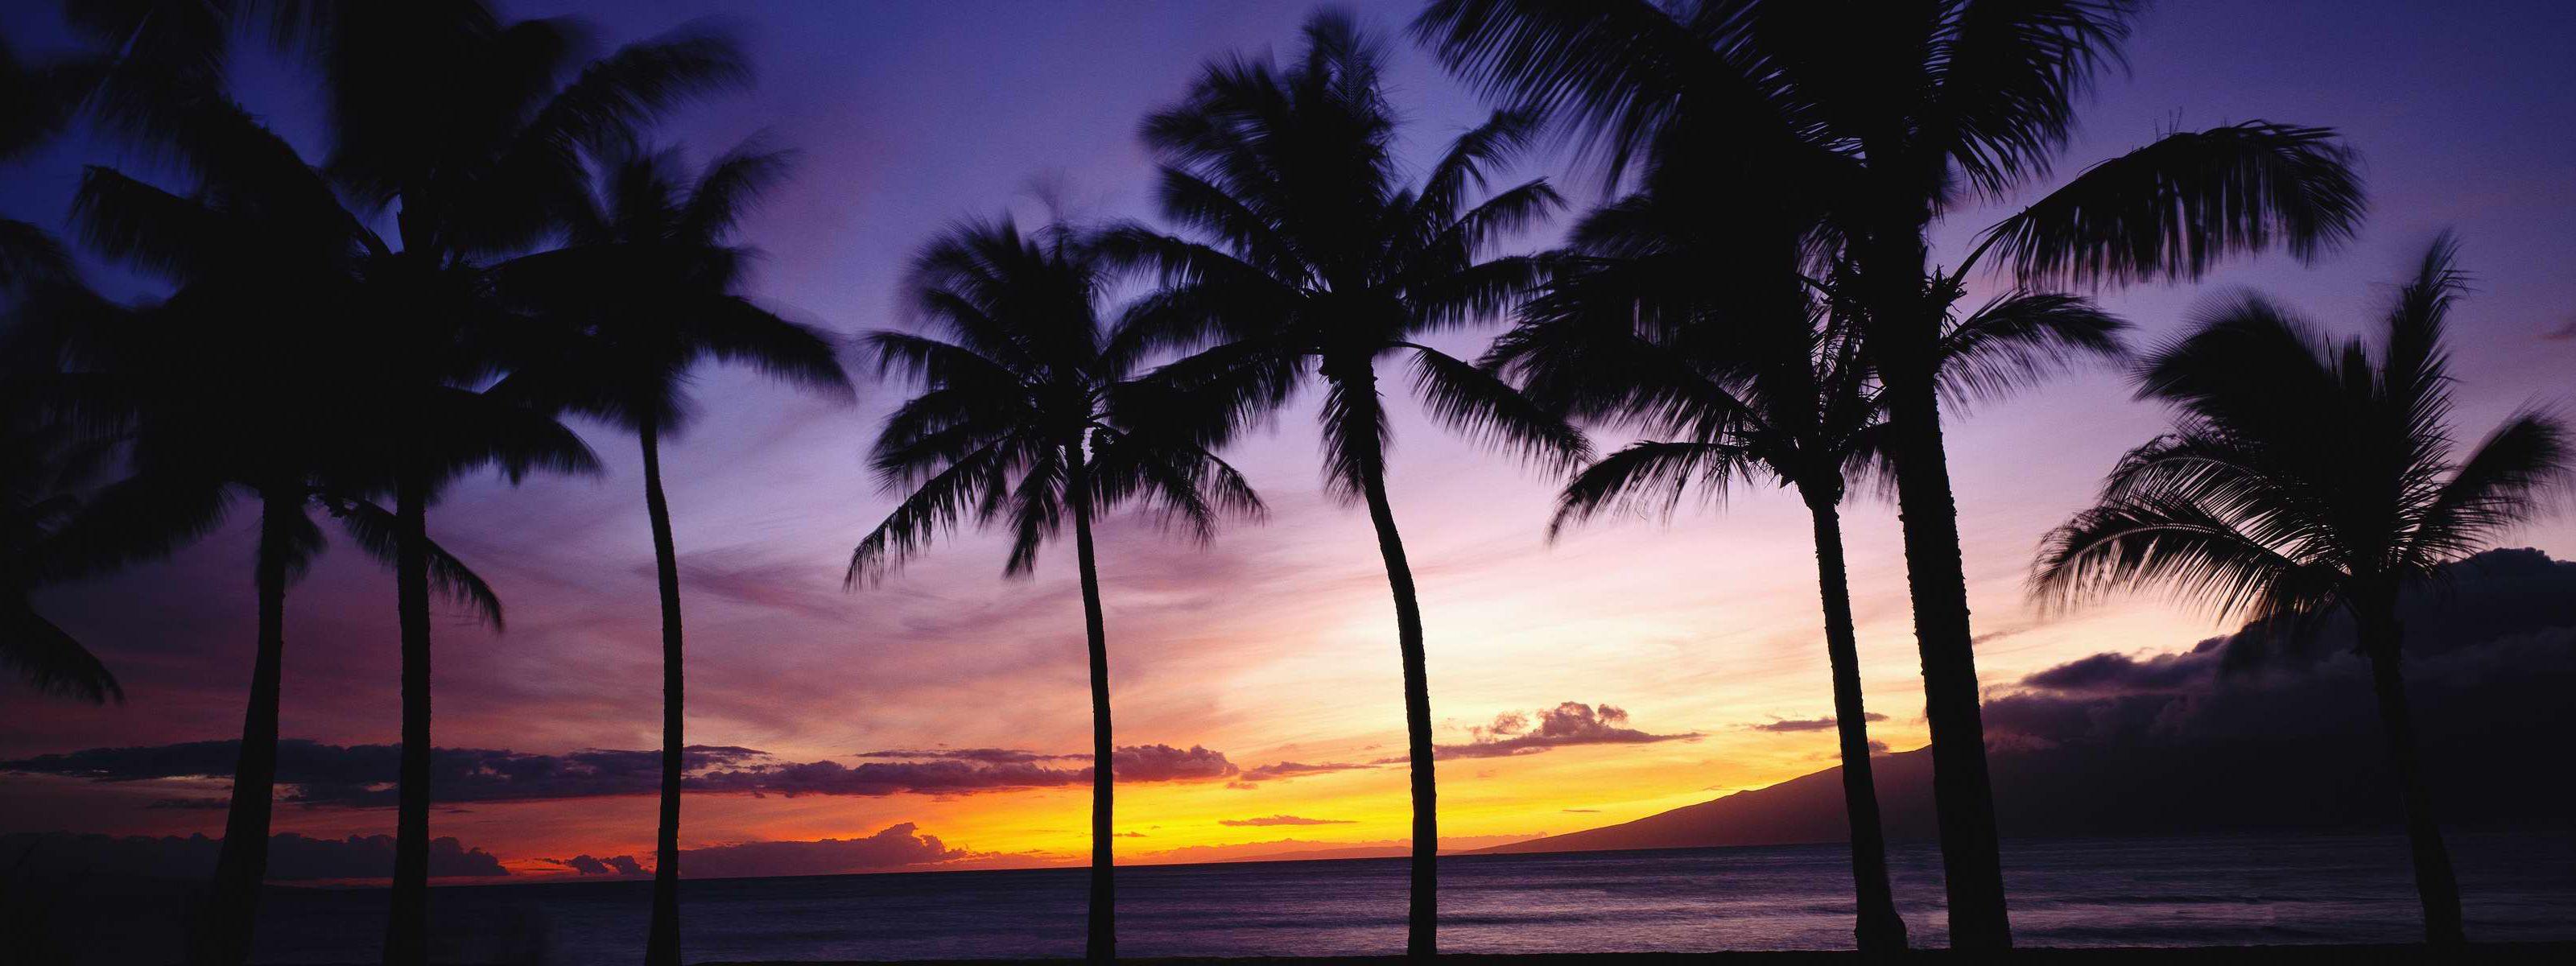 Palms and Sunset. Free Desktop Wallpaper for Widescreen, HD and Mobile